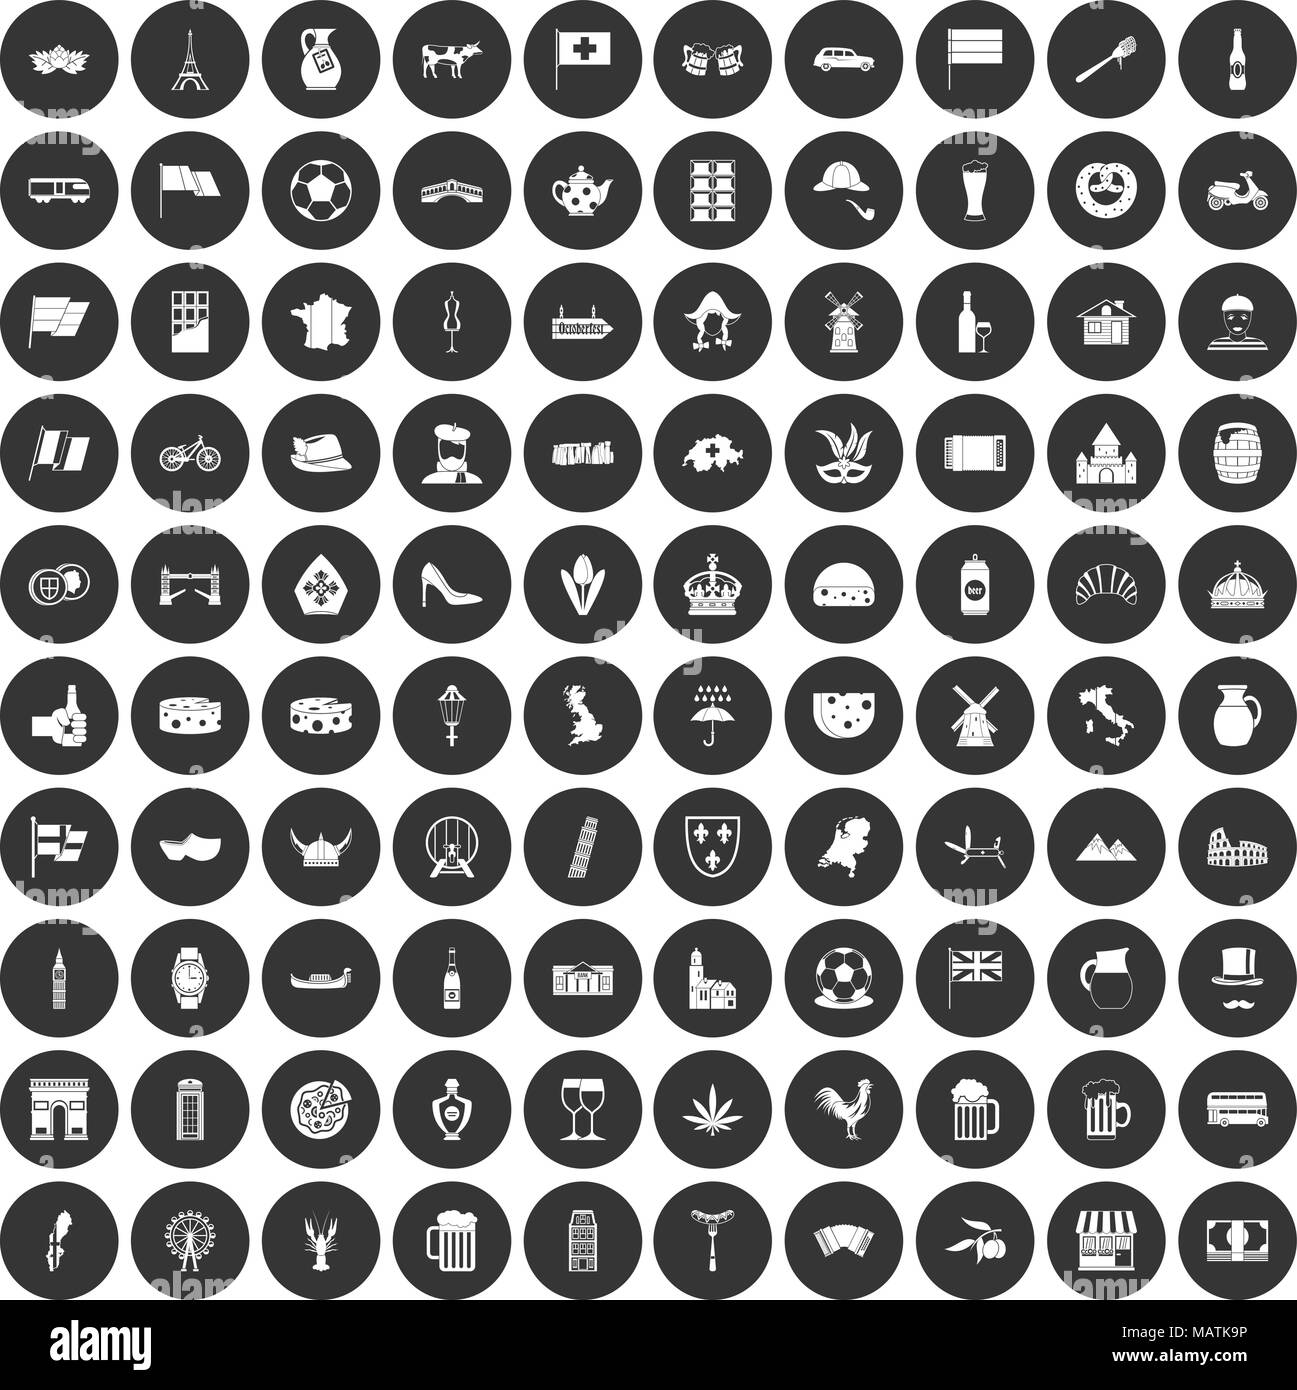 100 europe countries icons set black circle Stock Vector